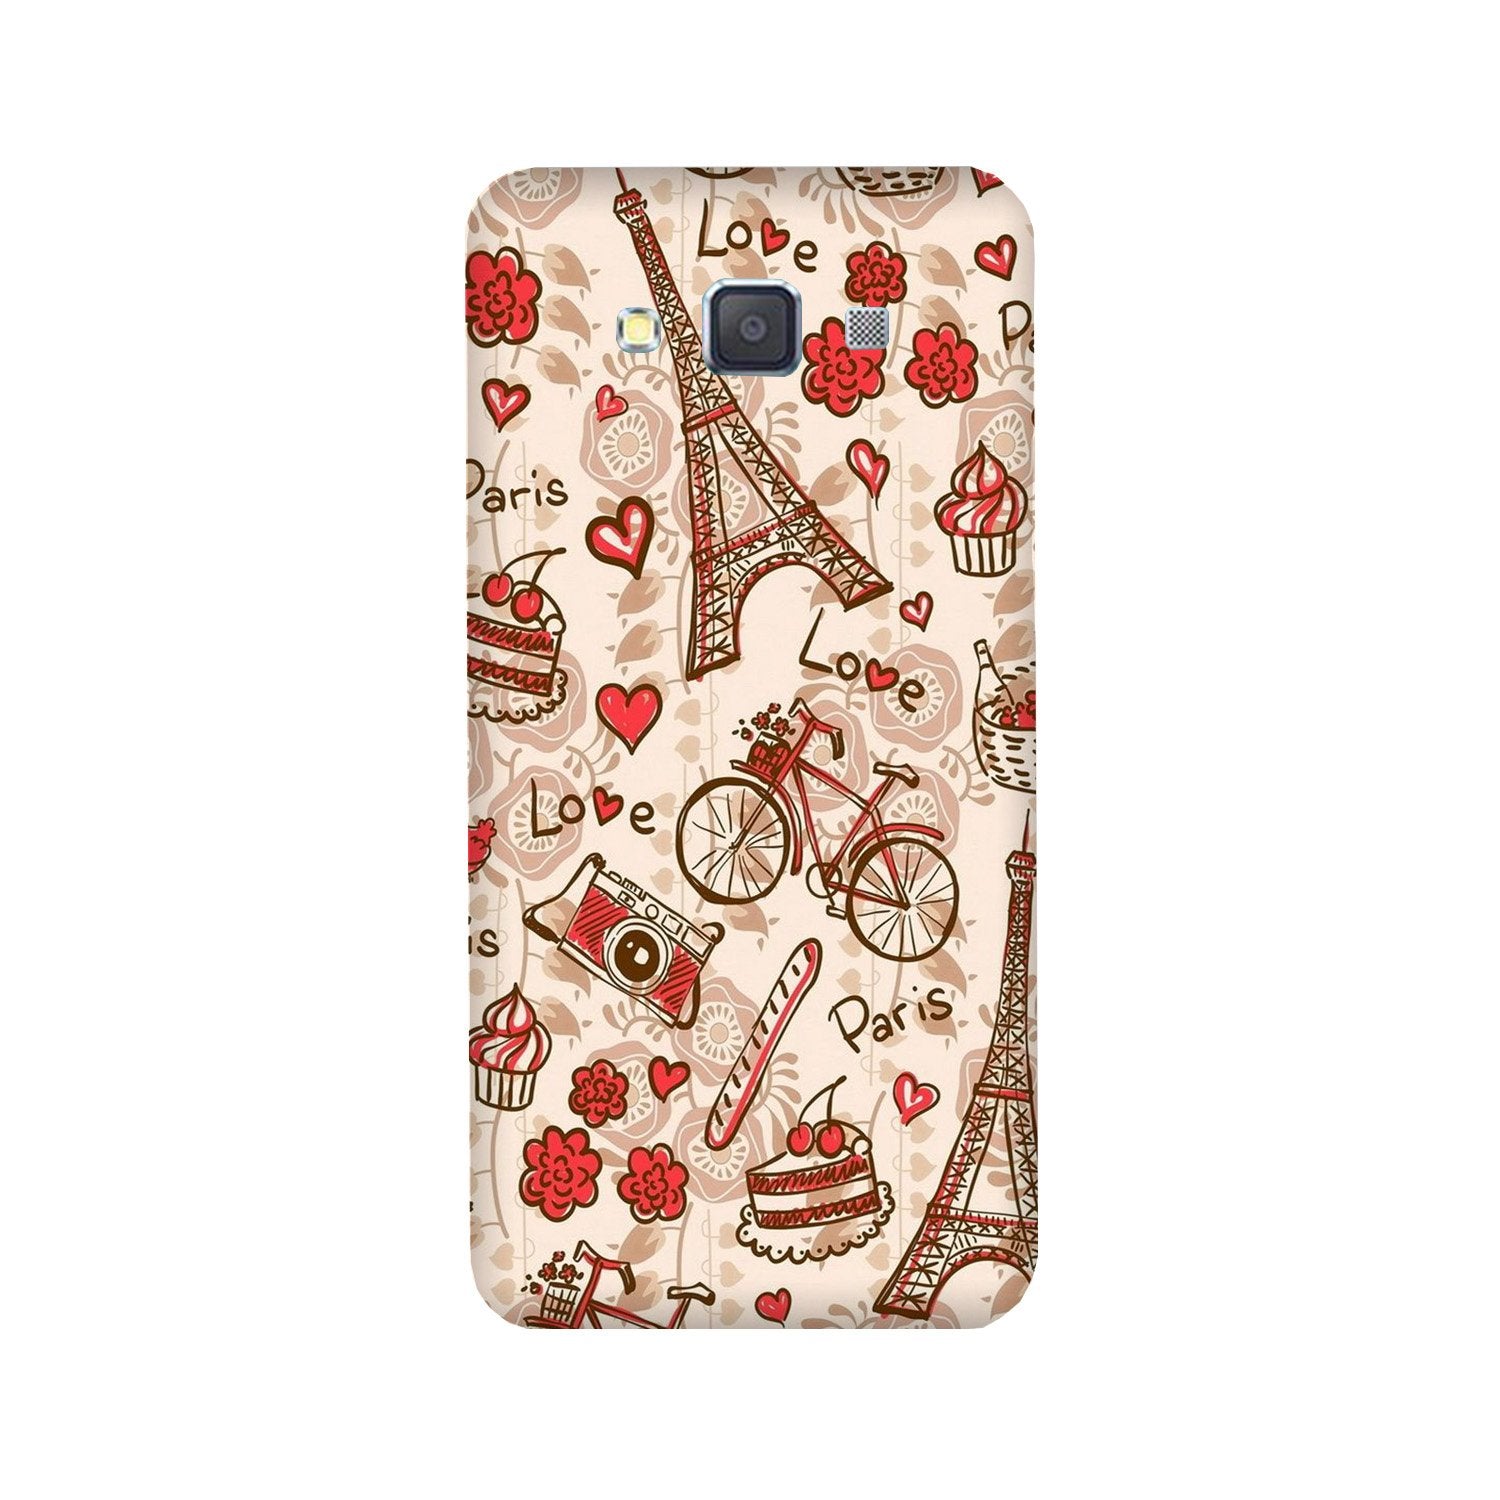 Love Paris Case for Galaxy ON7/ON7 Pro(Design - 103)